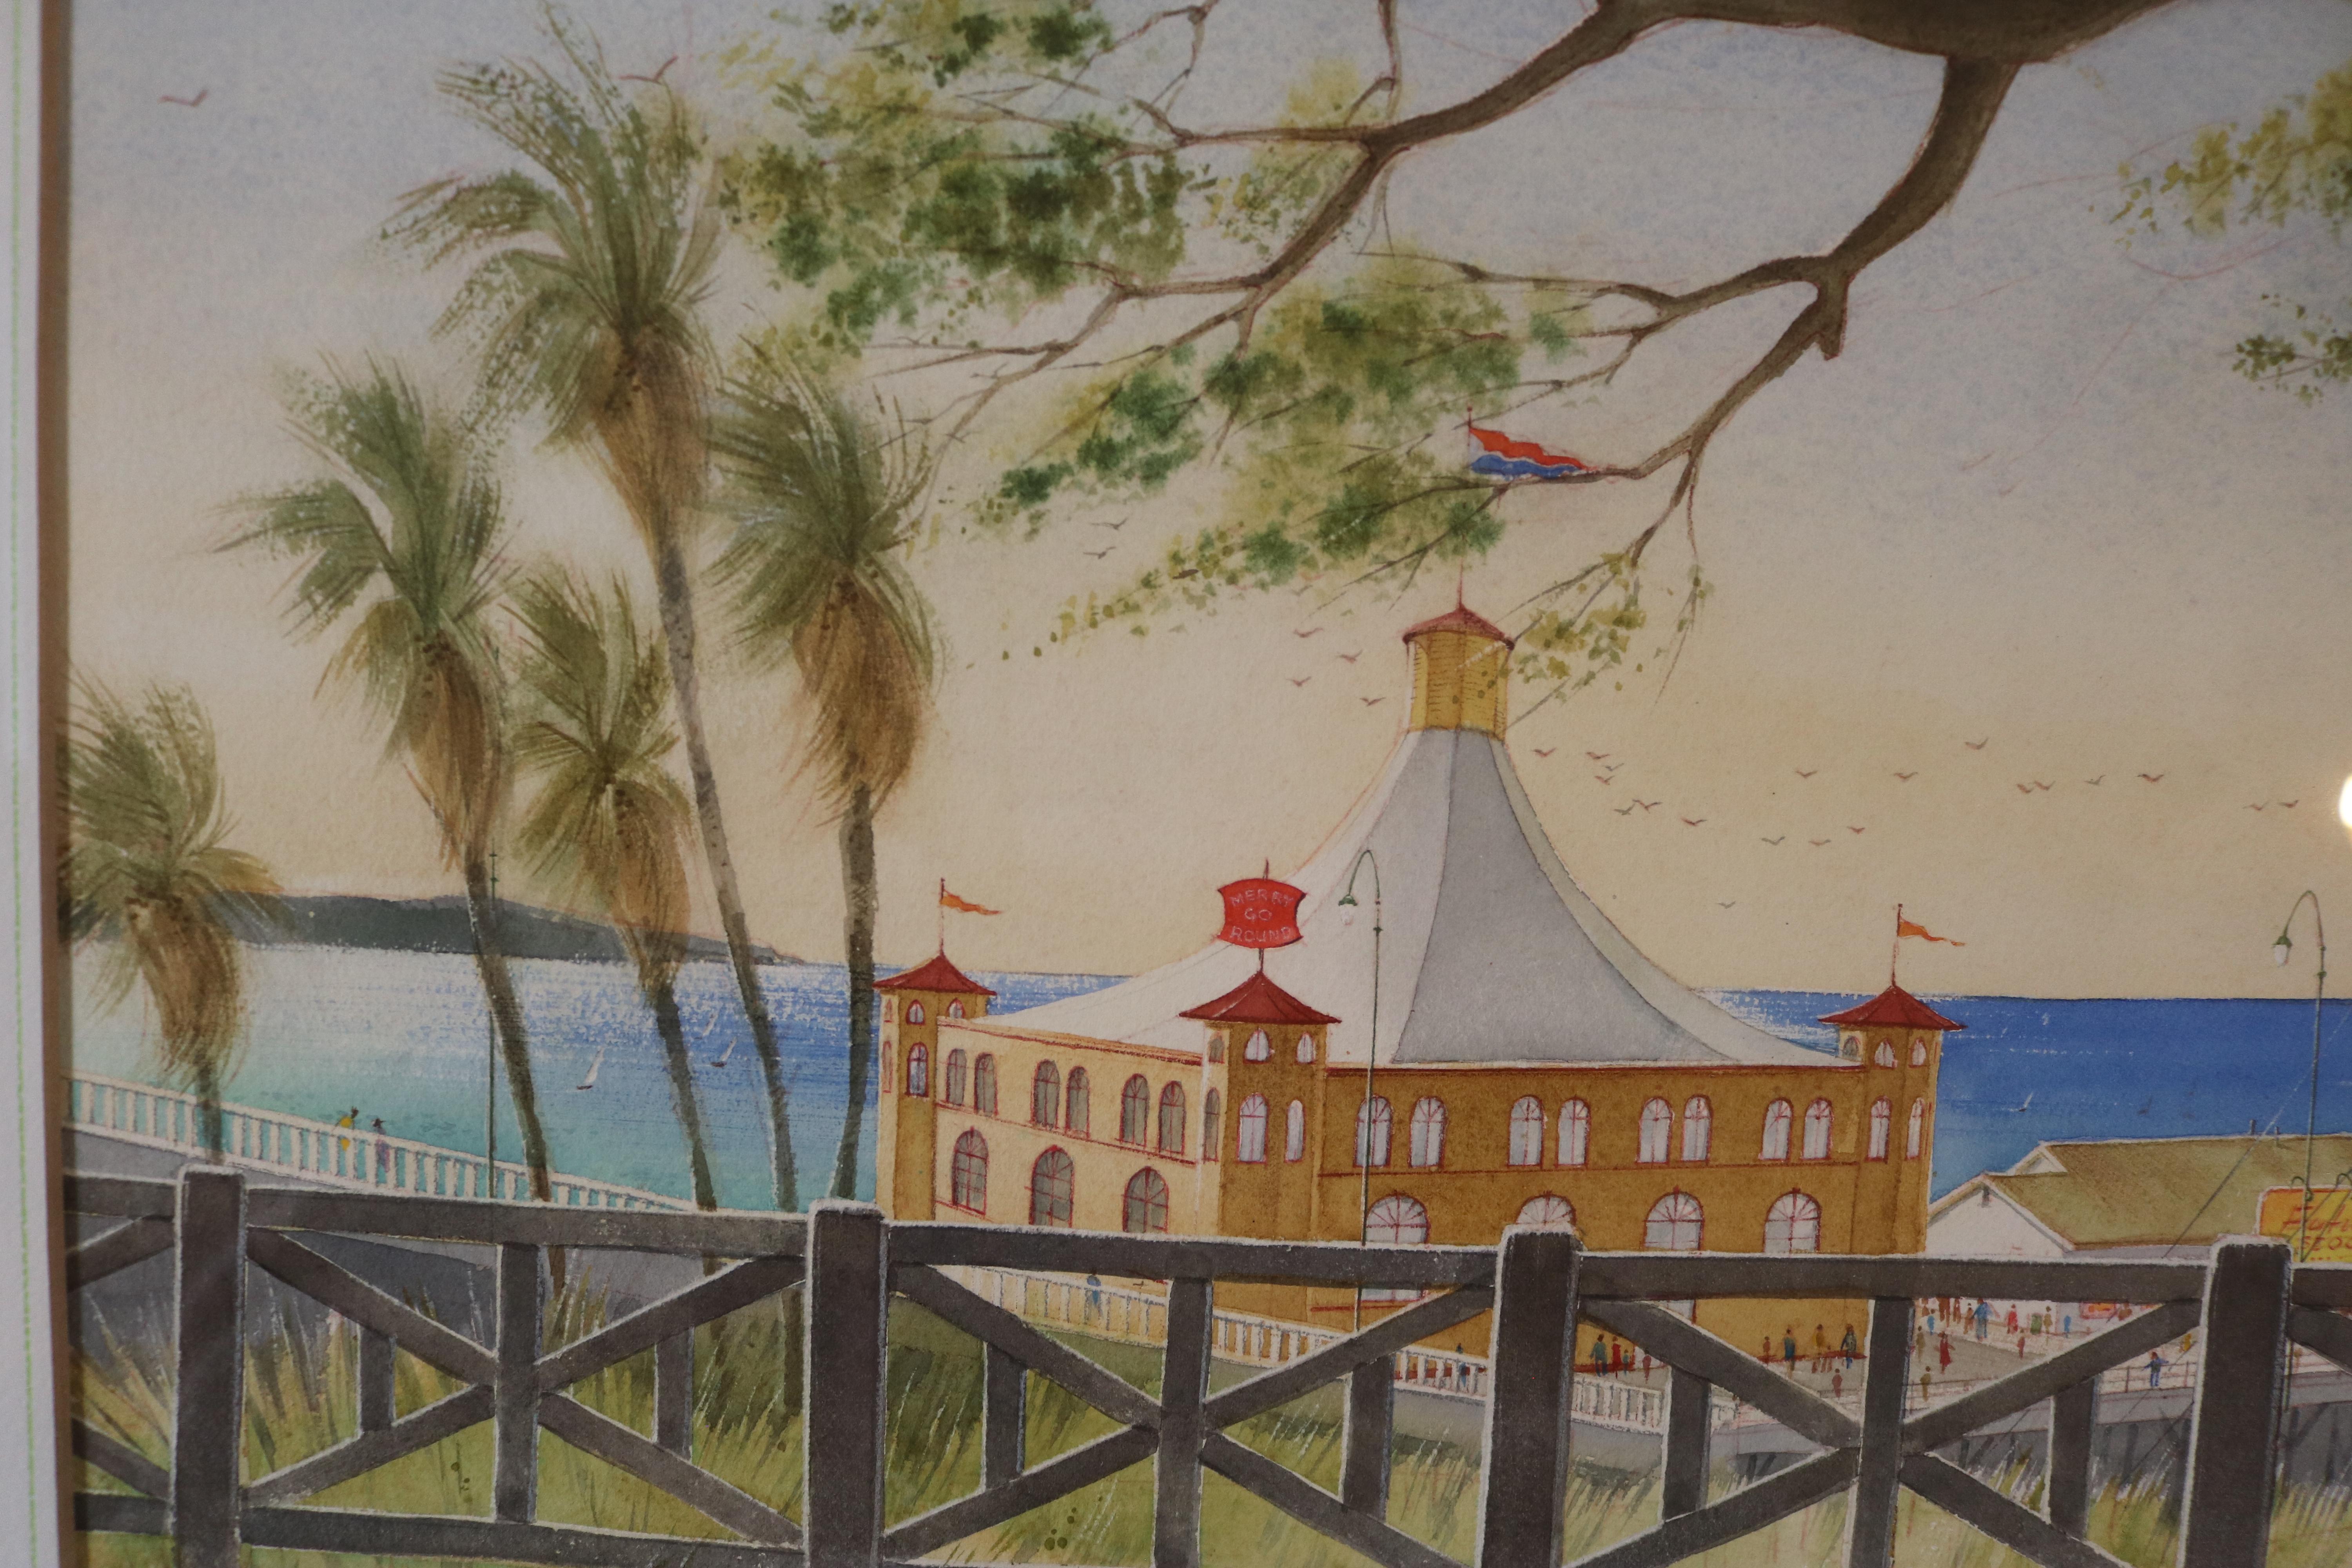 Pacific Palisades Watercolor signed Stanton In Excellent Condition For Sale In Pasadena, CA